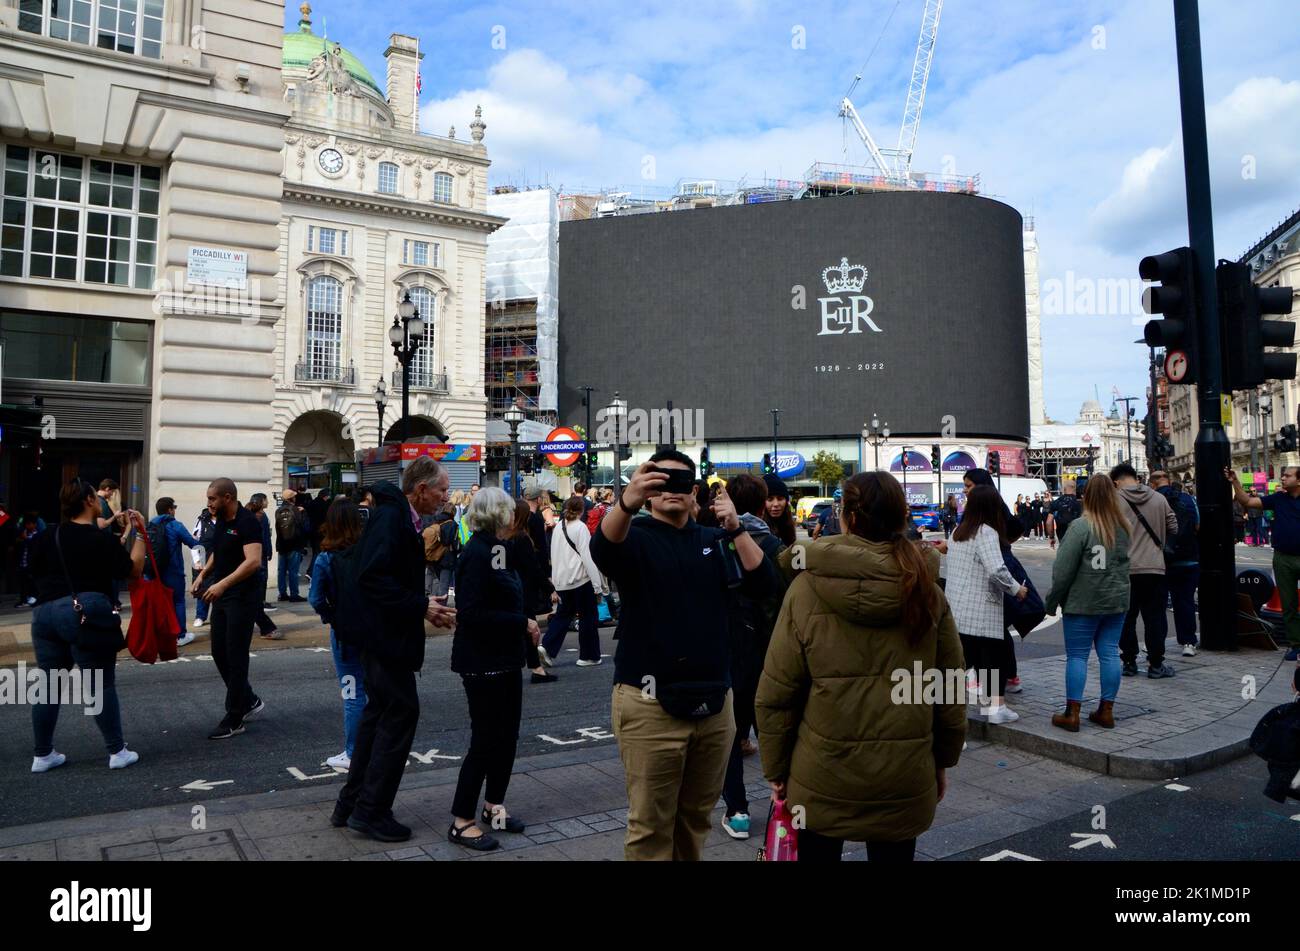 scenes from central london on the occasion of the funeral of Queen Elizabeth 2 19th september 2022 Stock Photo